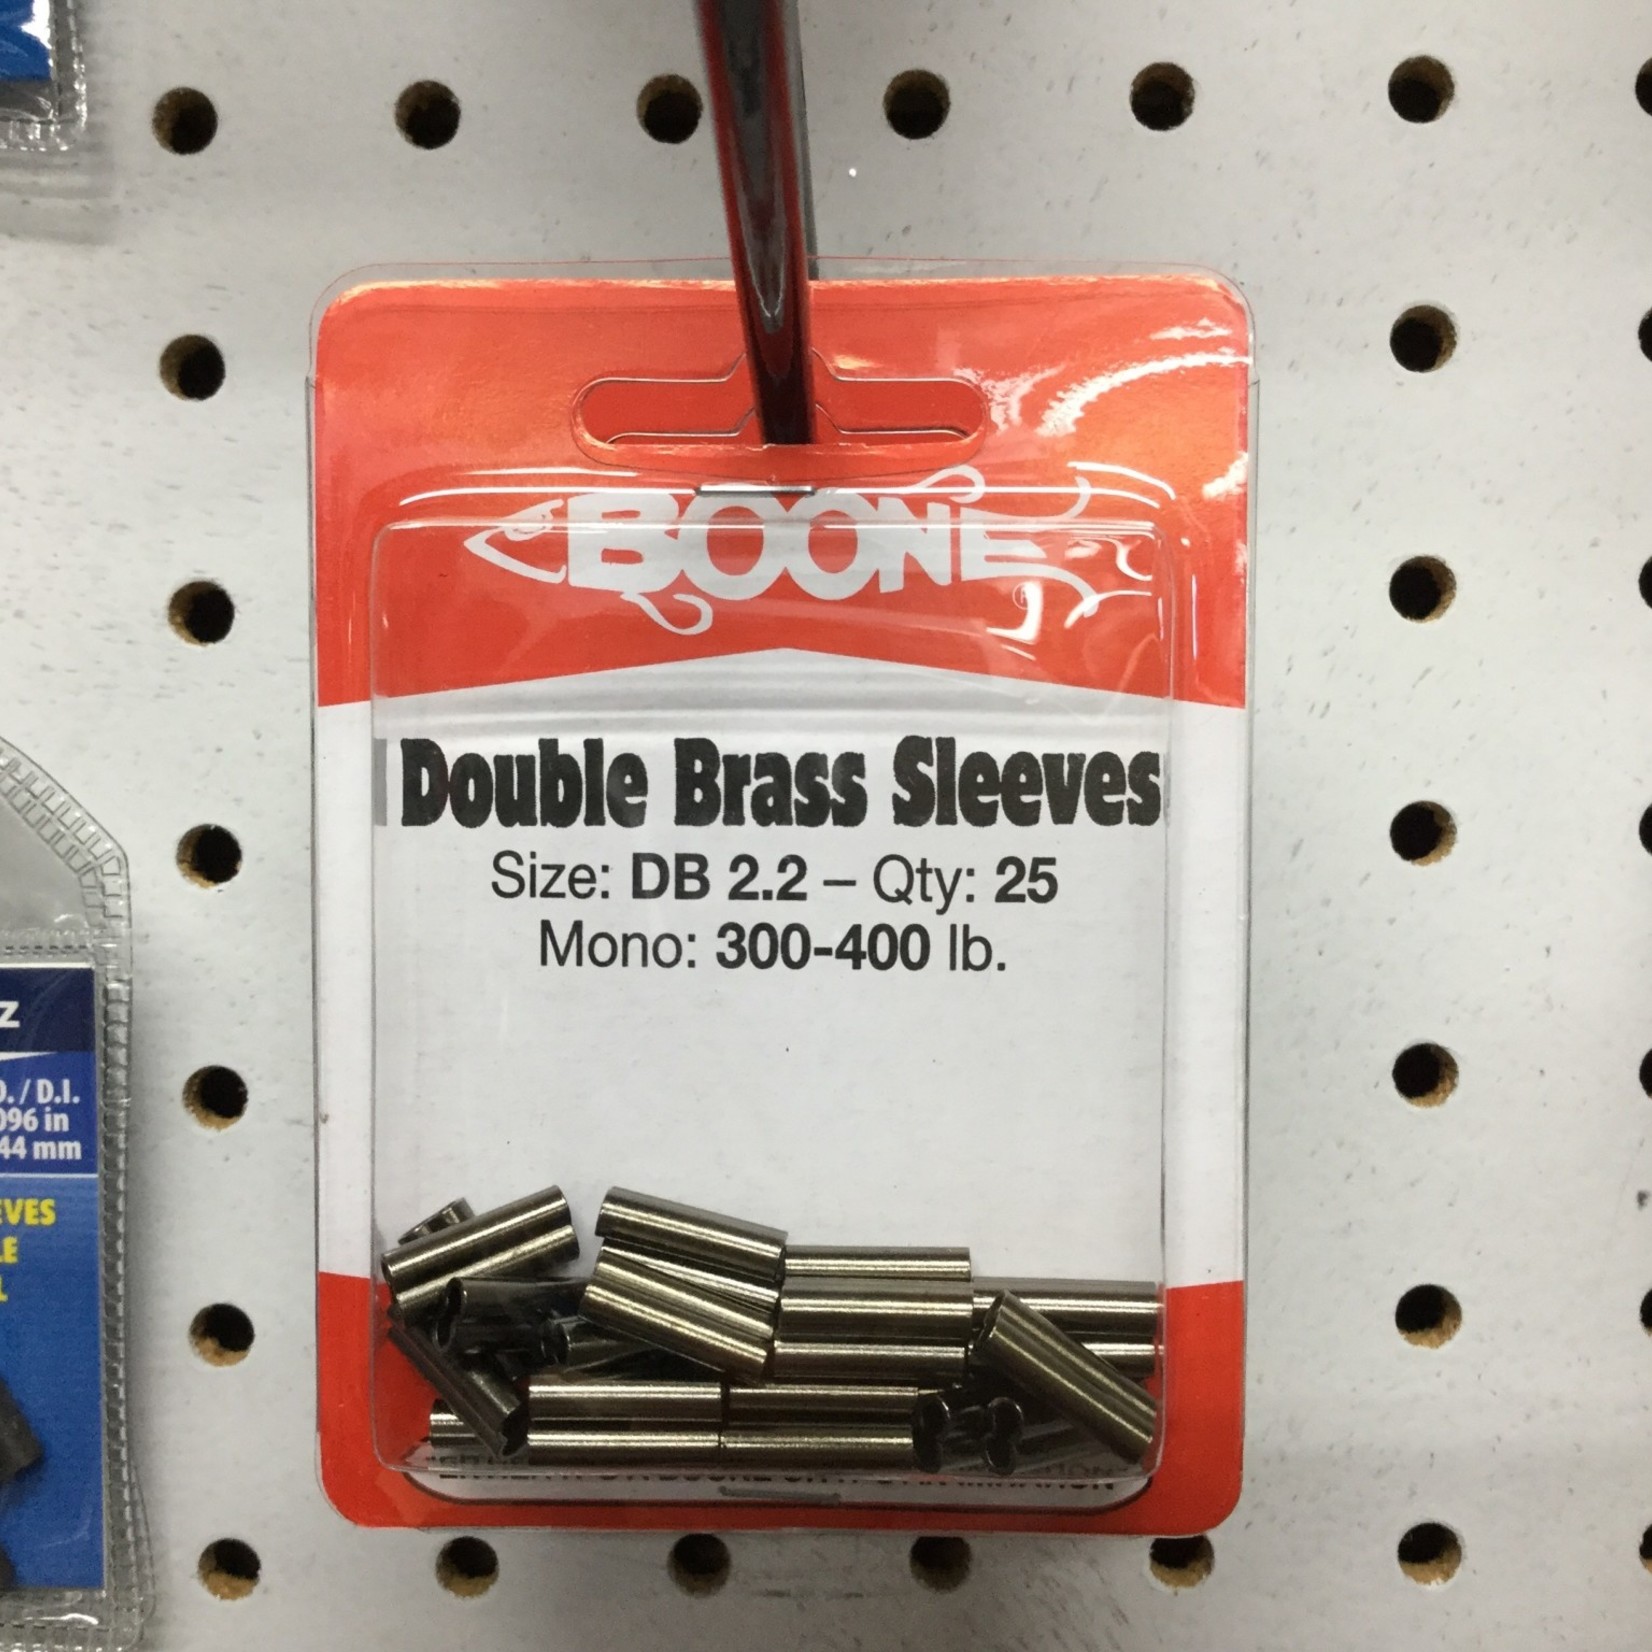 Boone Double Brass Sleeves